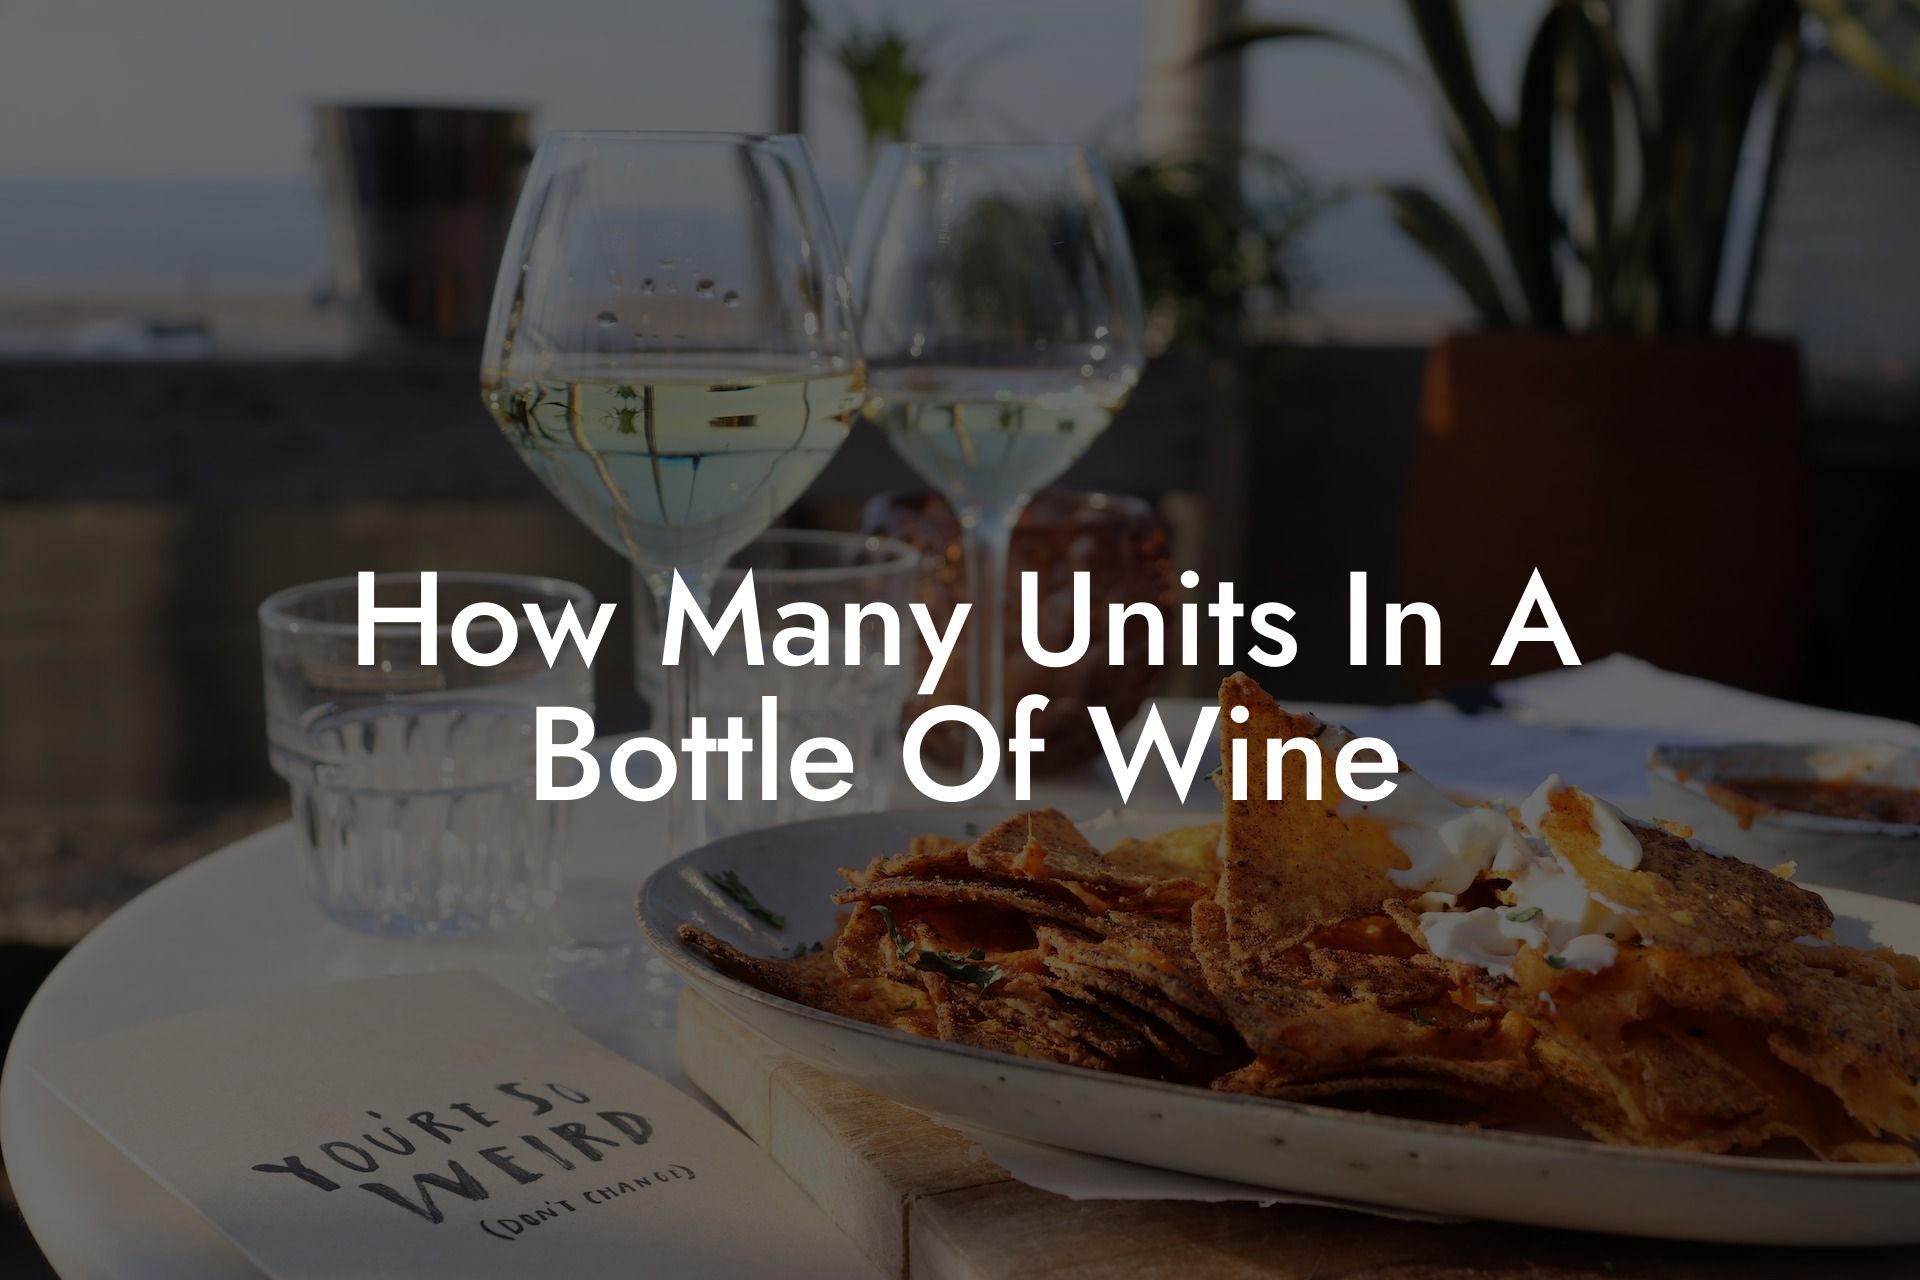 How Many Units In A Bottle Of Wine